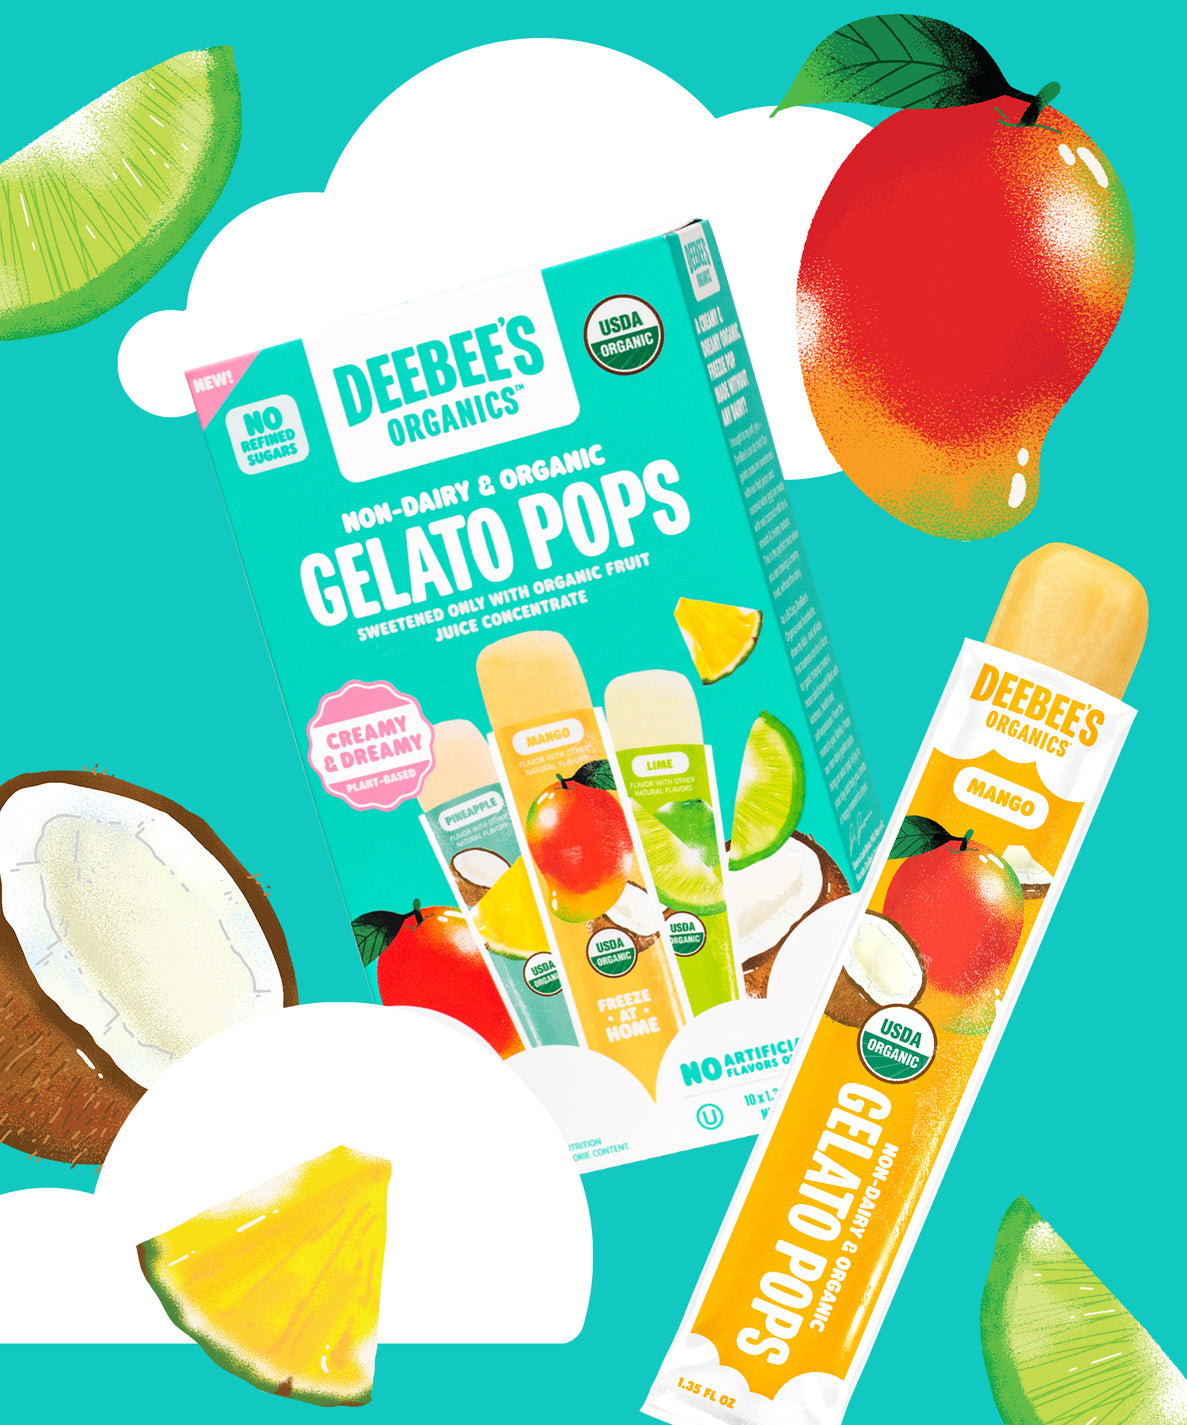 A DeeBees Organics Non-Dairy Gelato Pop box on a teal background surrounded by art of clouds, pineapples, mangoes, limes, and coconuts. A Mango gelato pop is in front of the box.